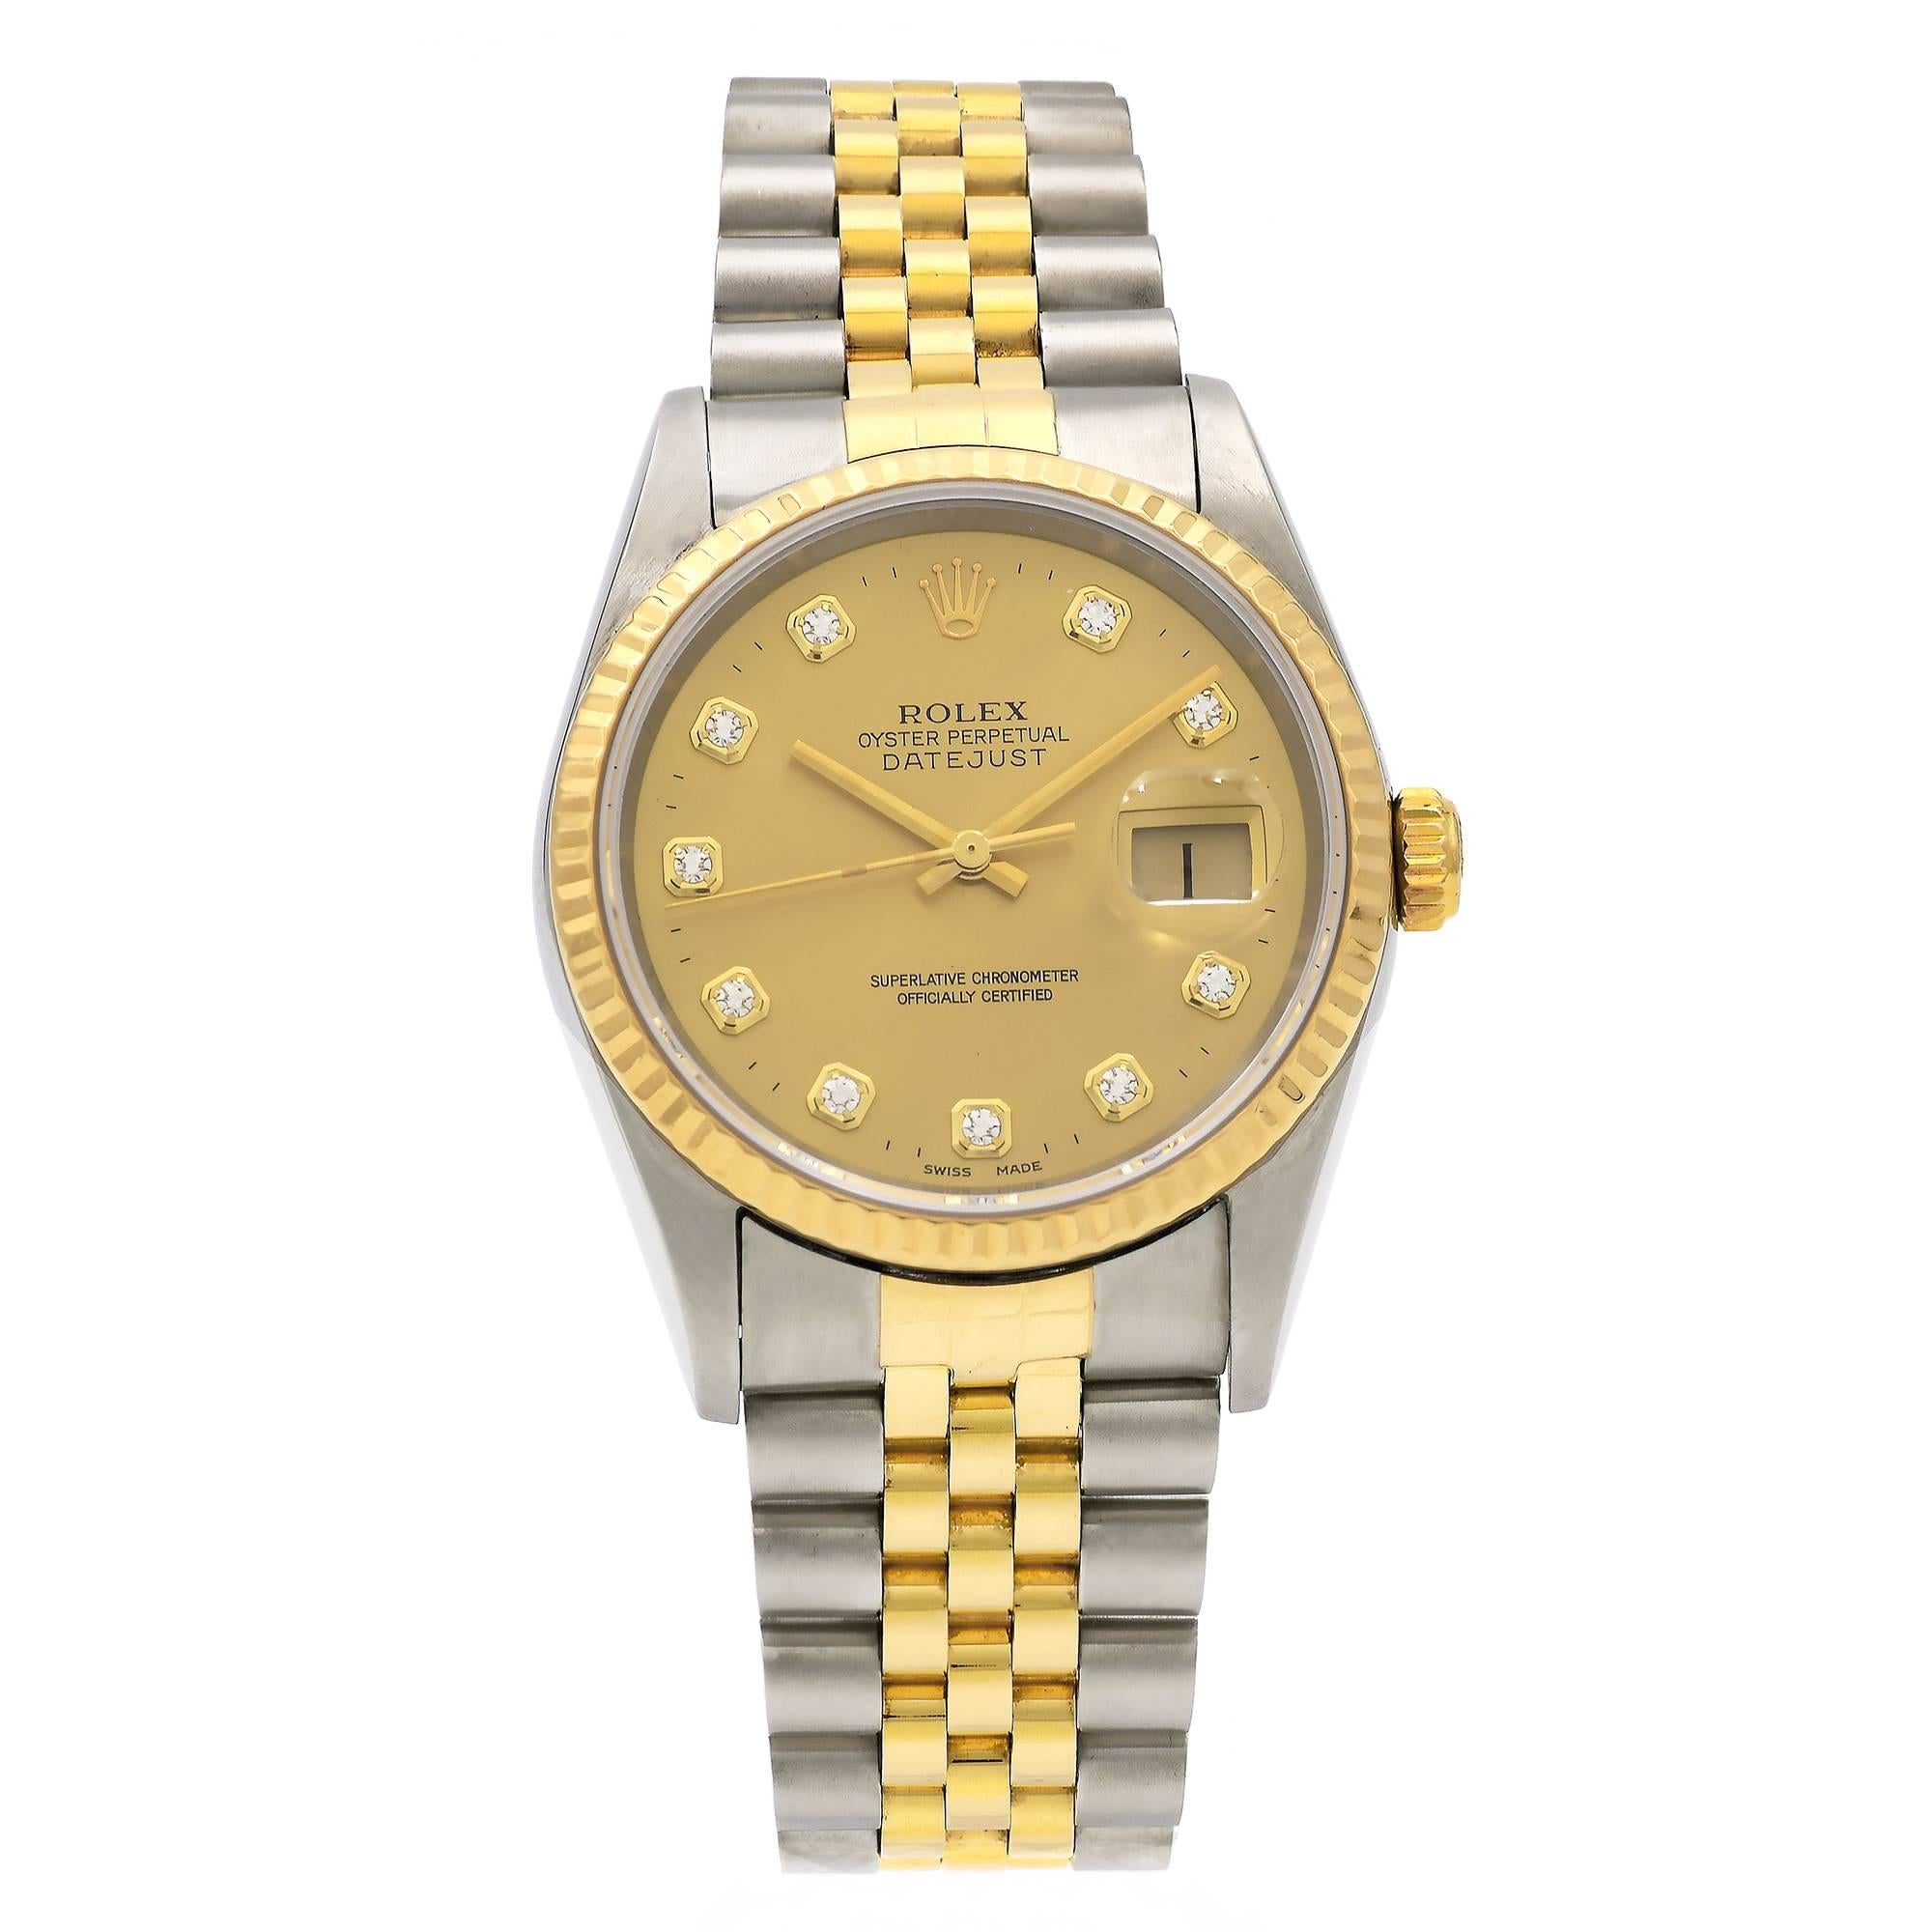 Mens Rolex Date Just 18k gold and steel with a factory original diamond dial. 18k and steel jubilee band. Secure catch. No holes on case lugs . Circa 2002. Links are available

10 Diamond markers
101.5 Grams
73.6 Inches
Length: 44mm
Width: 36mm
Band